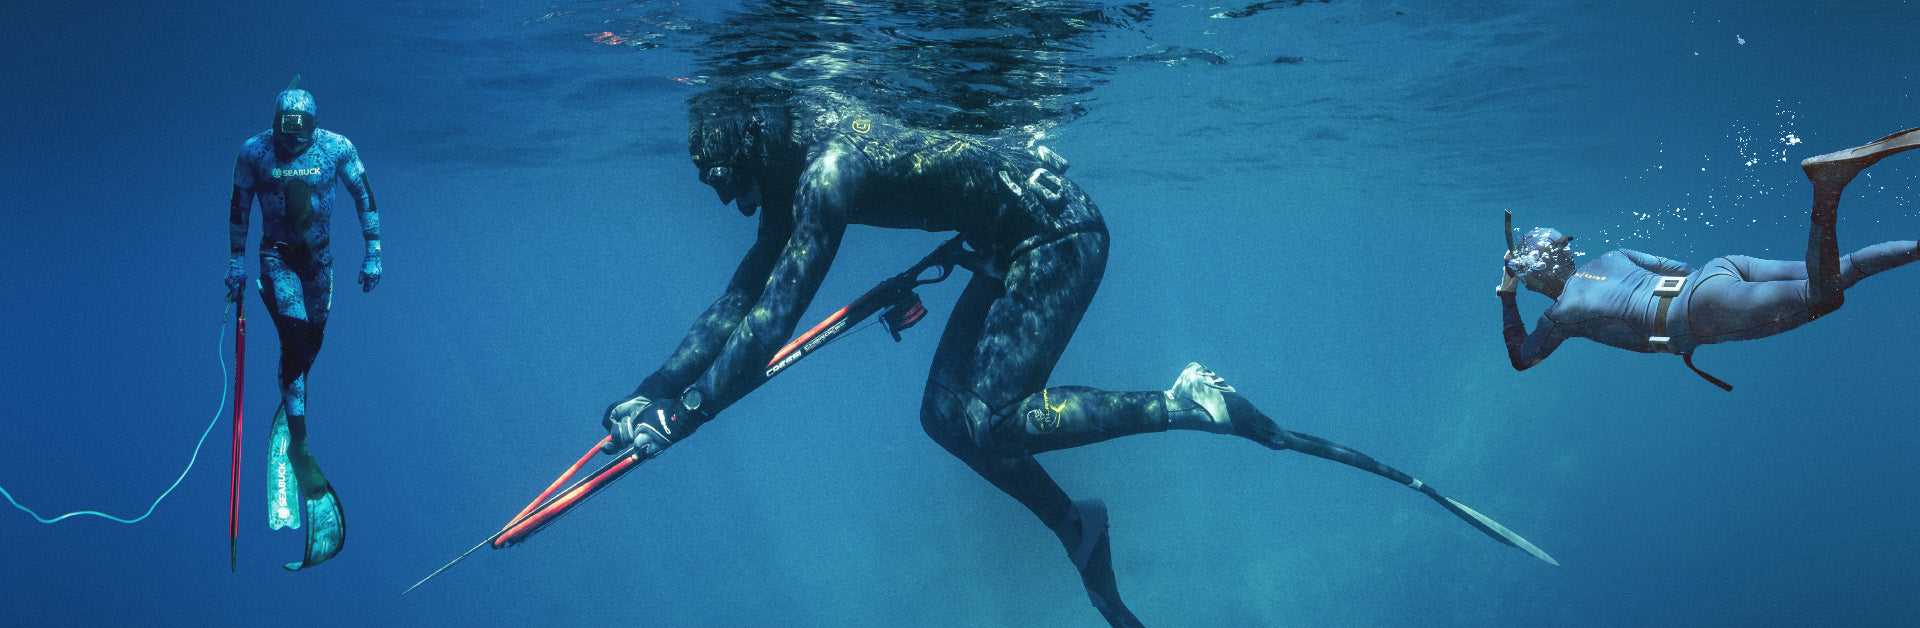 Buy 1.5mm Wetsuit Spearfishing online